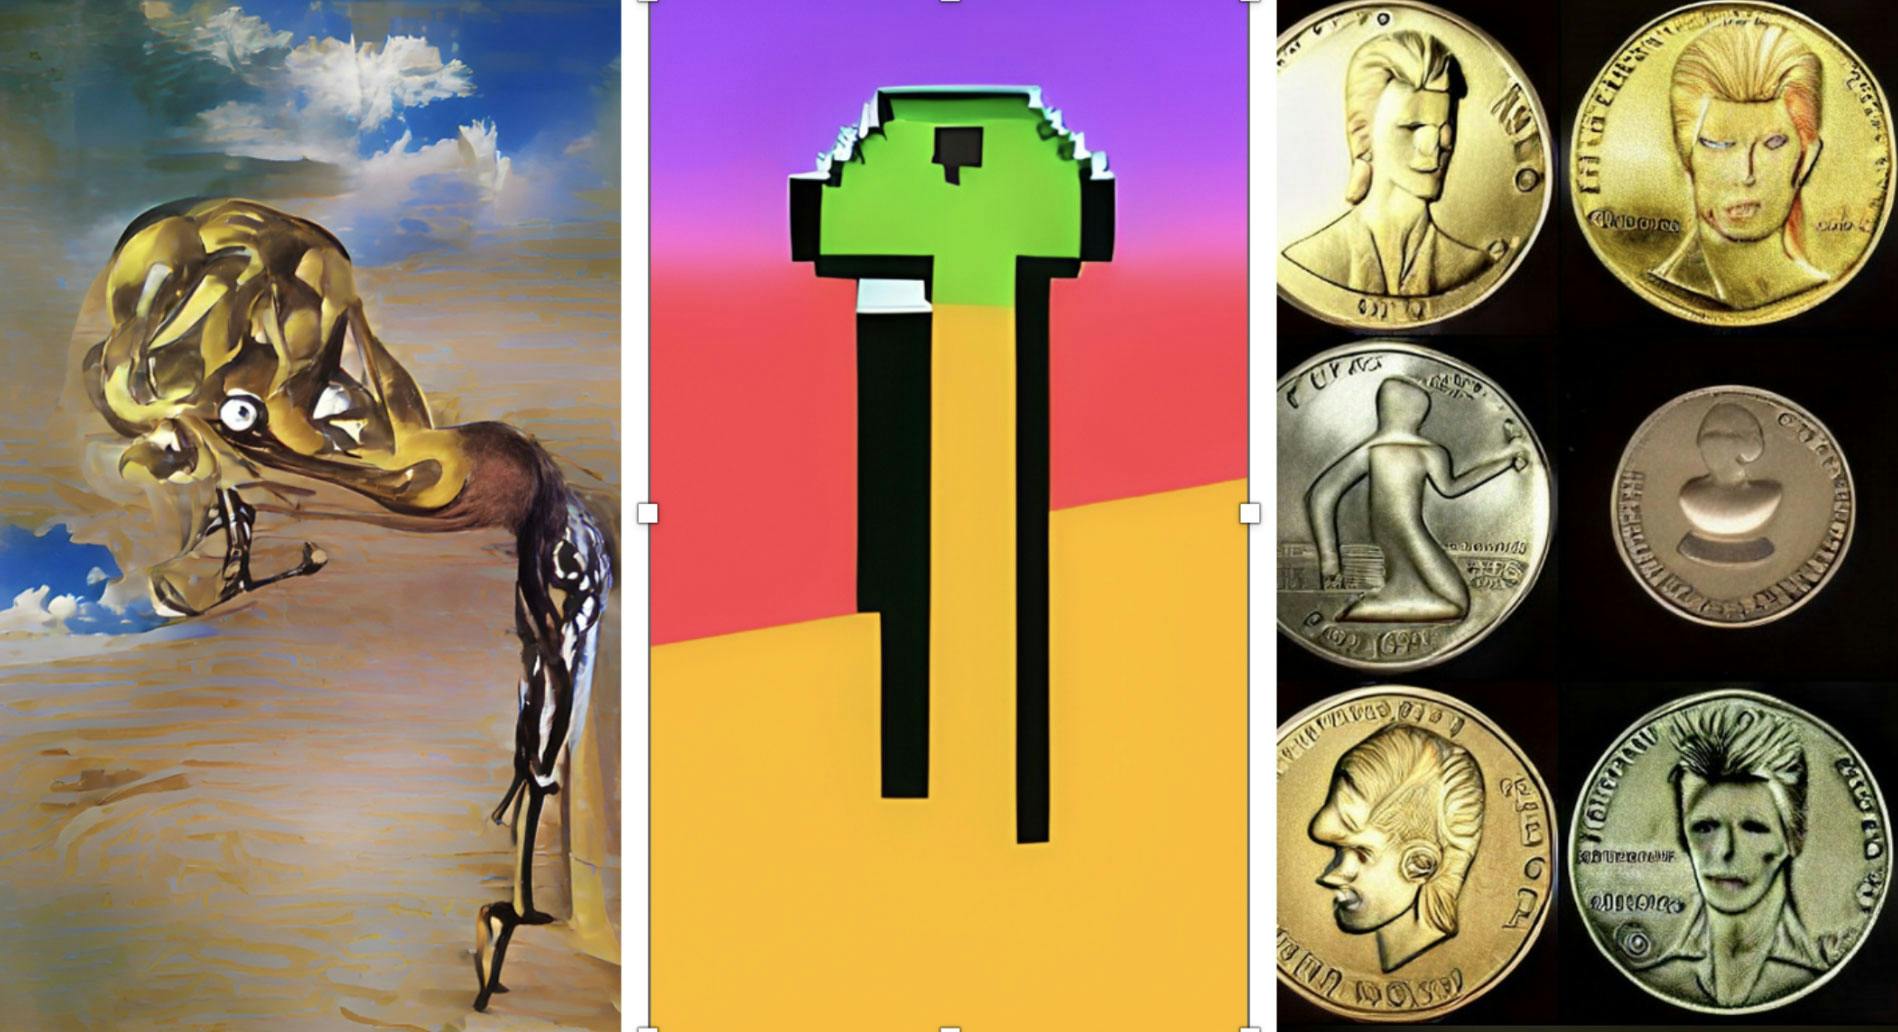 (Figs. 1-3) NFTWTF?, Pixel Plant, Bowie Coin, a selection of student AI-generated artworks, 2022 